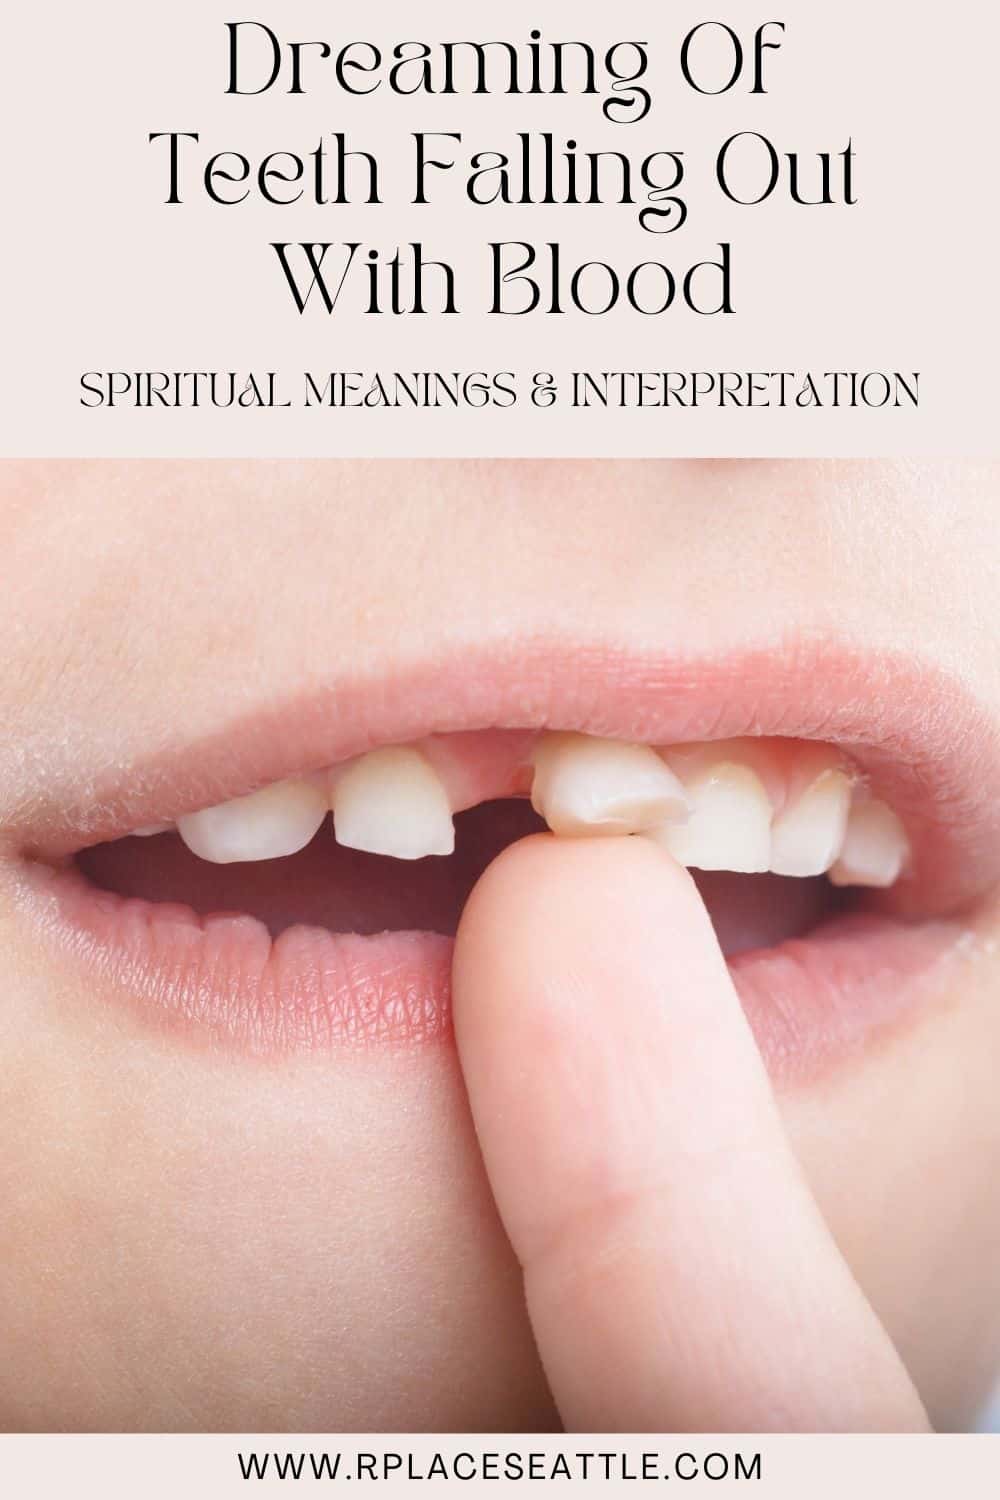 Dreaming Of Teeth Falling Out With Blood (Spiritual Meanings & Interpretation)